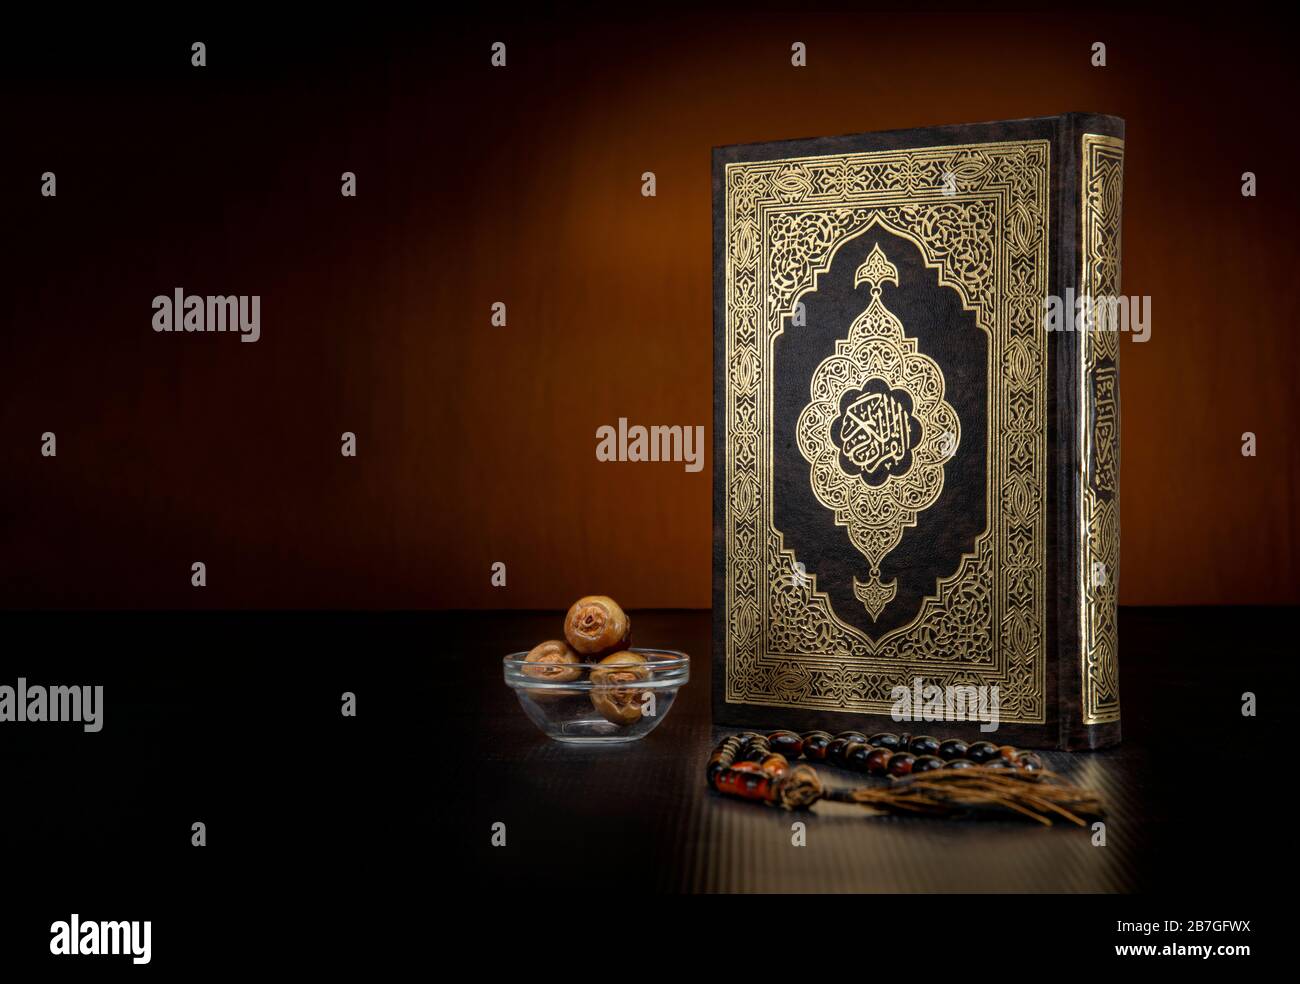 Holy Book of Quran With Rosary and Dates on Black Background, Celebrating Holy Month of Ramadan Stock Photo